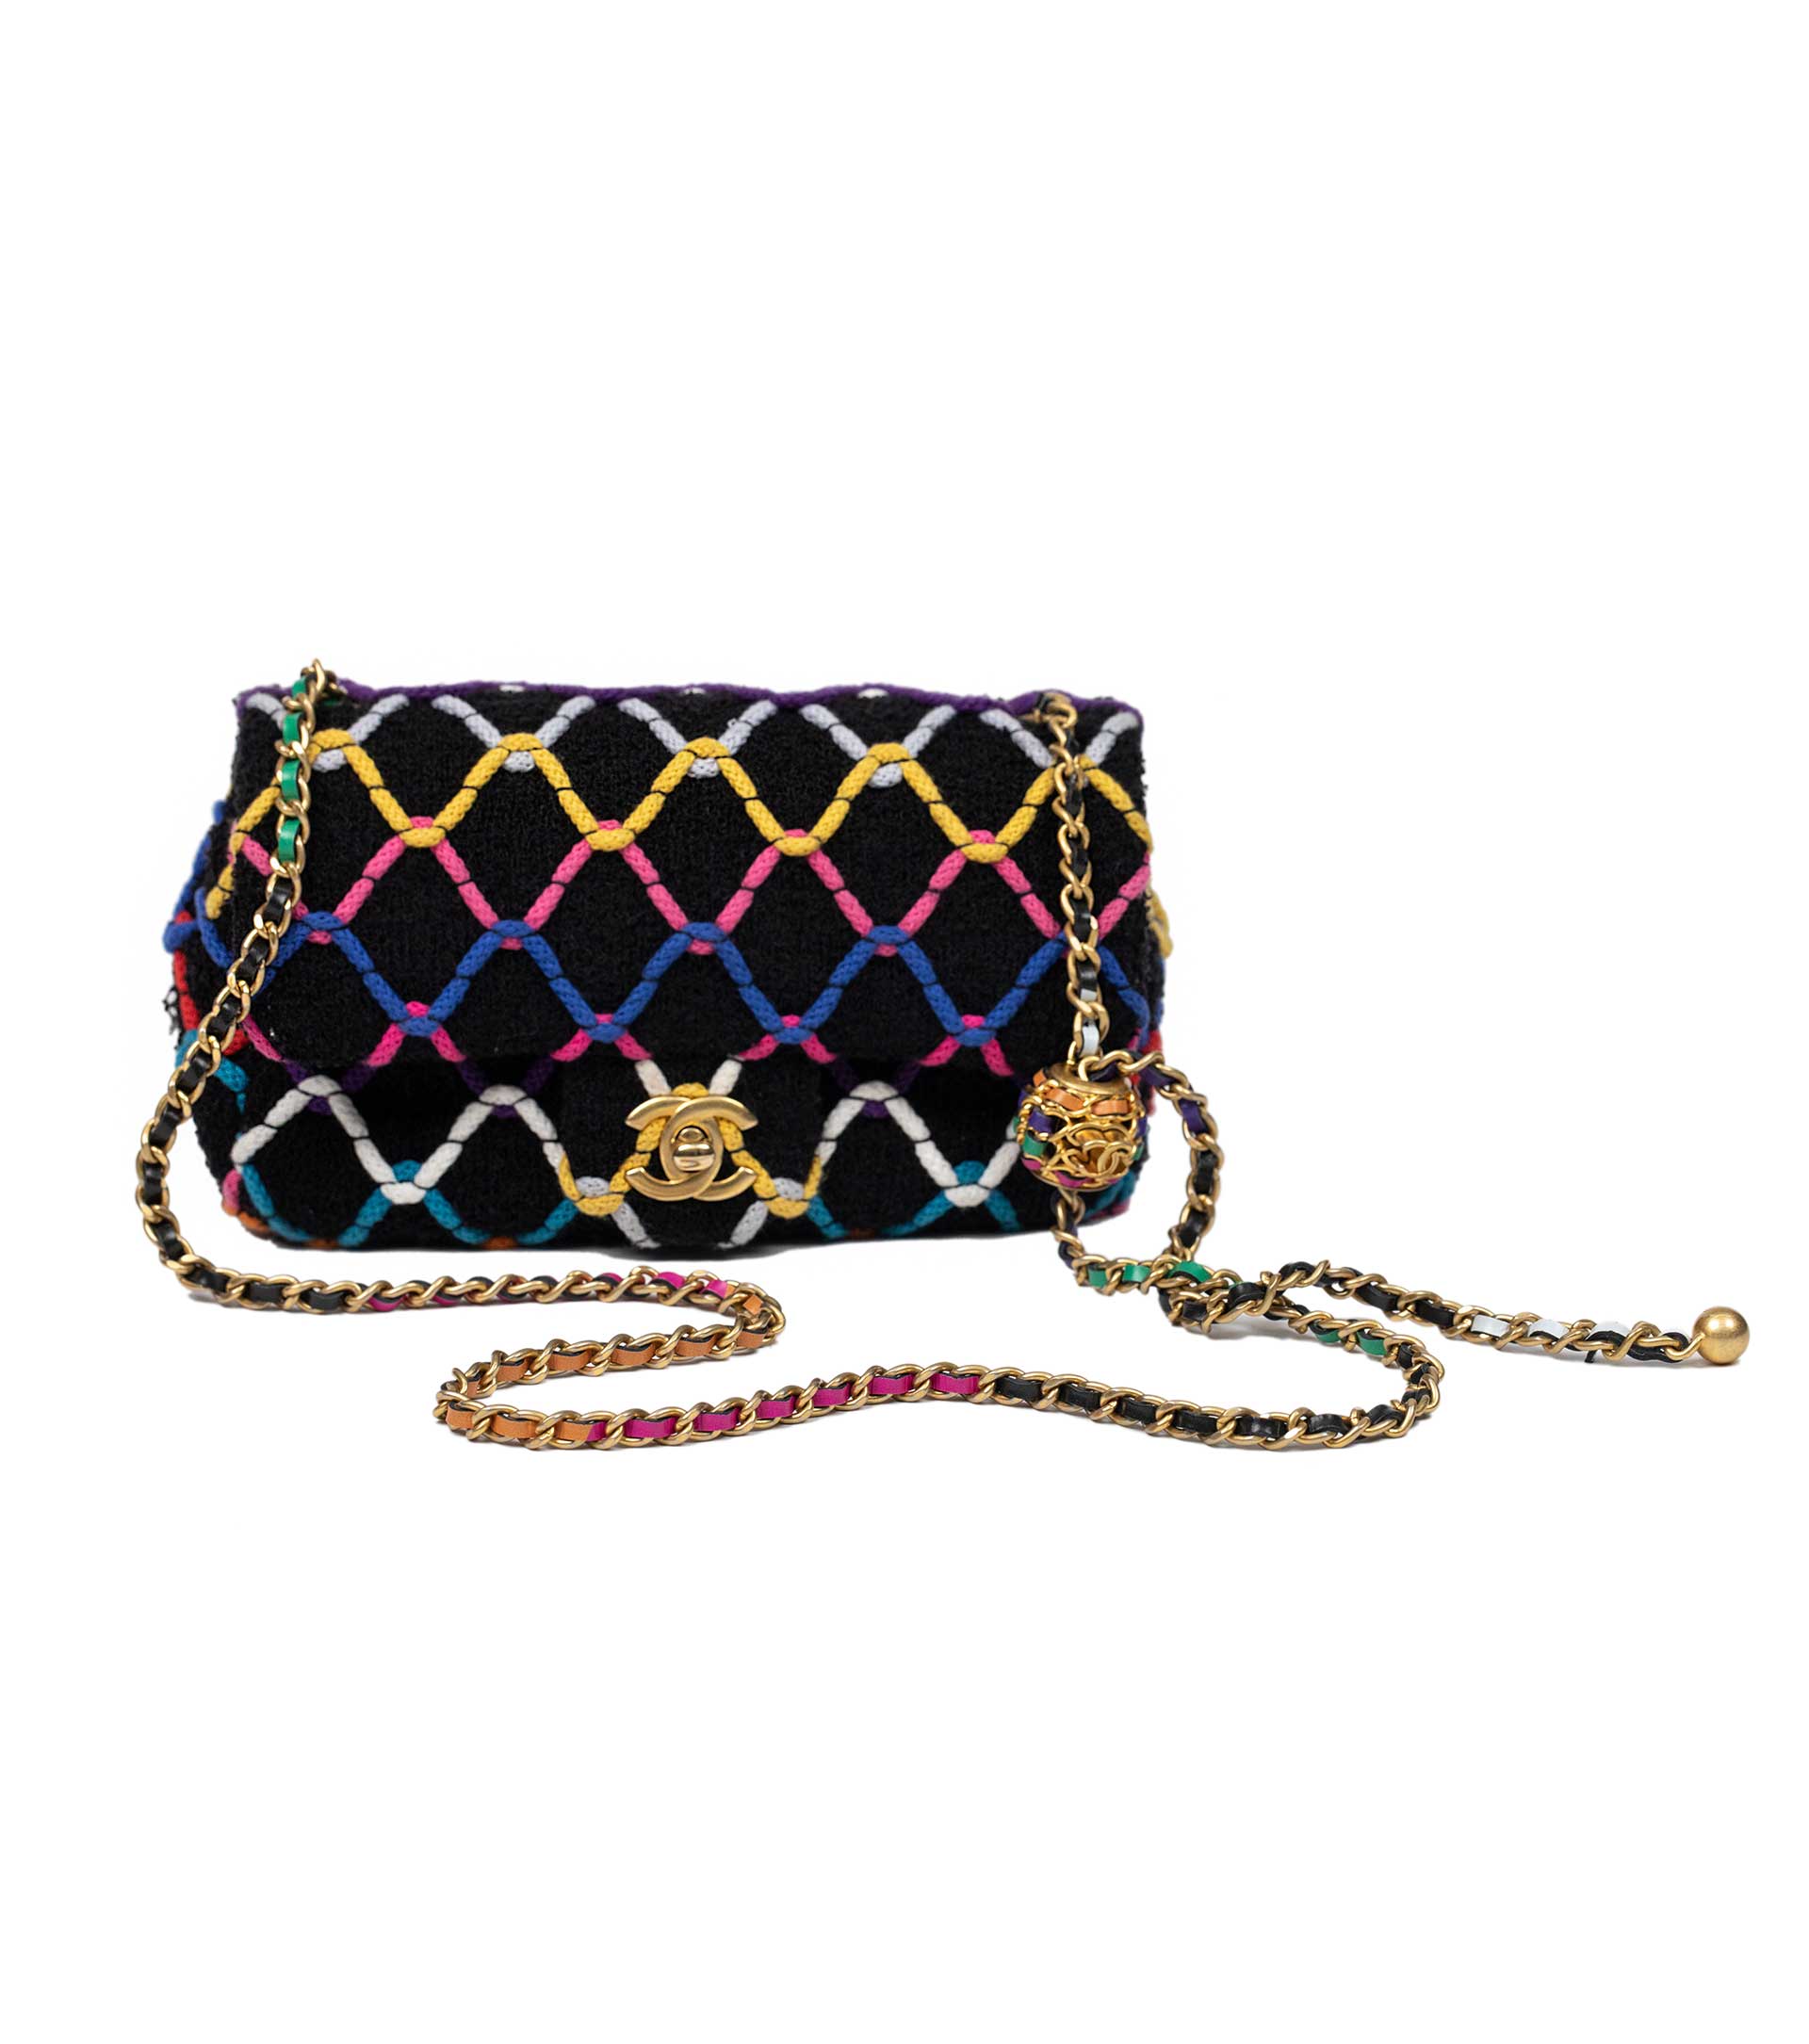 Chanel Quilted Mini Rectangular Flap Pink/Blue Tweed Gold Hardware 23 –  Coco Approved Studio